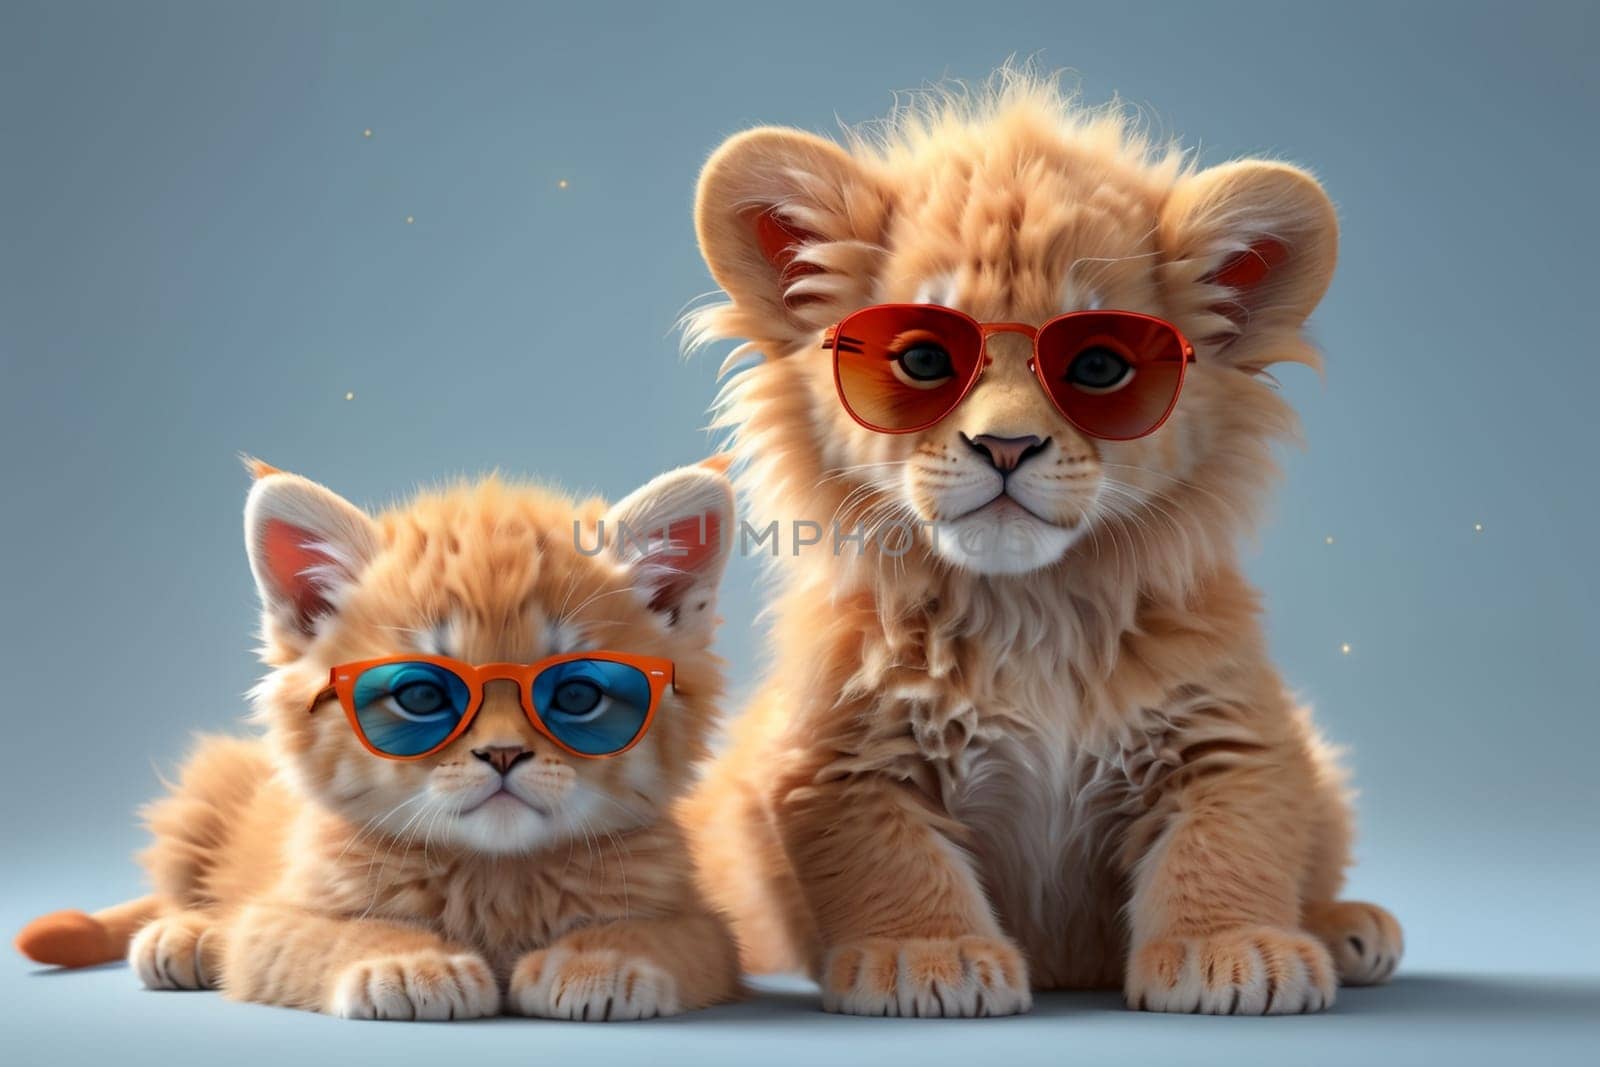 cute red tiger cub and kitten, isolated on a blue background .